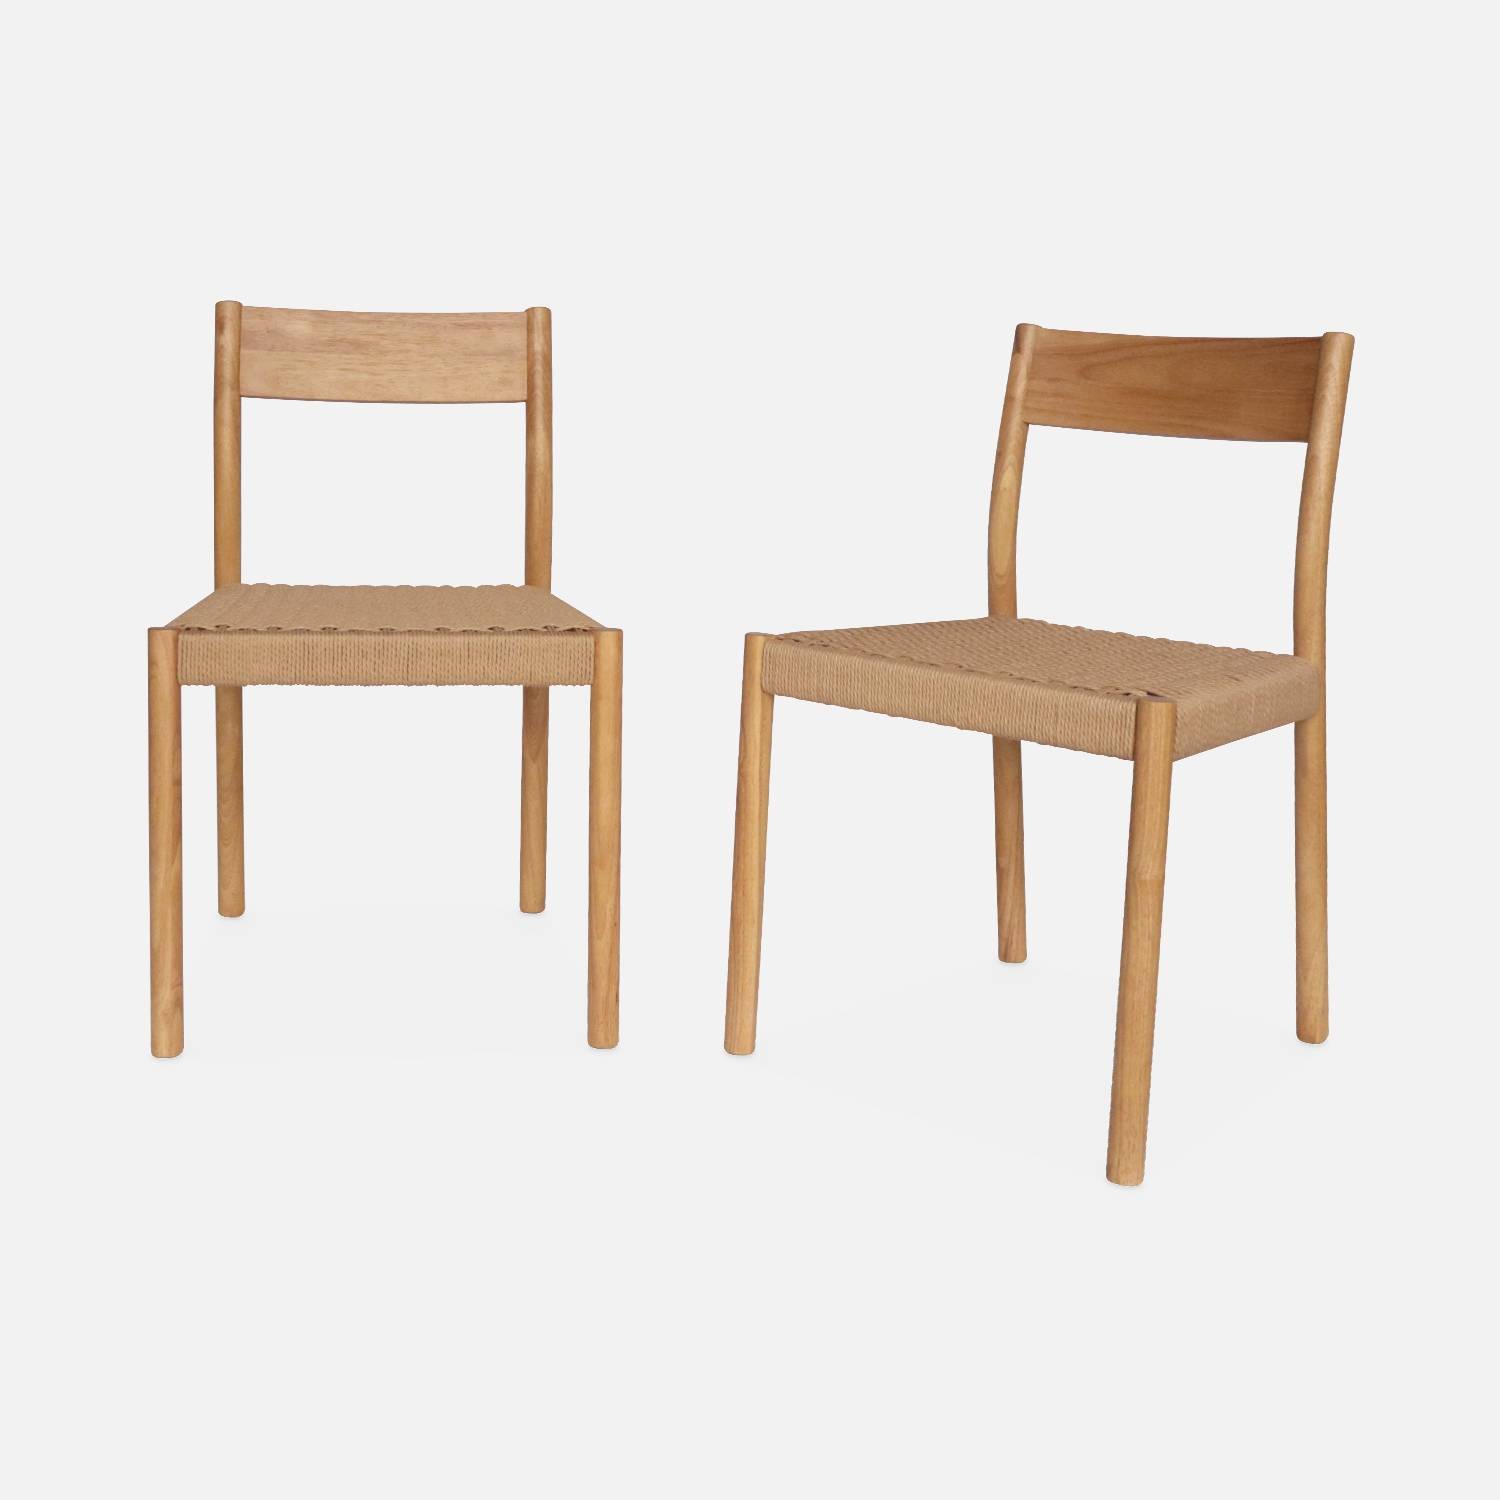 Pair of timeless design Wood and Rope Dining Room chairs | sweeek